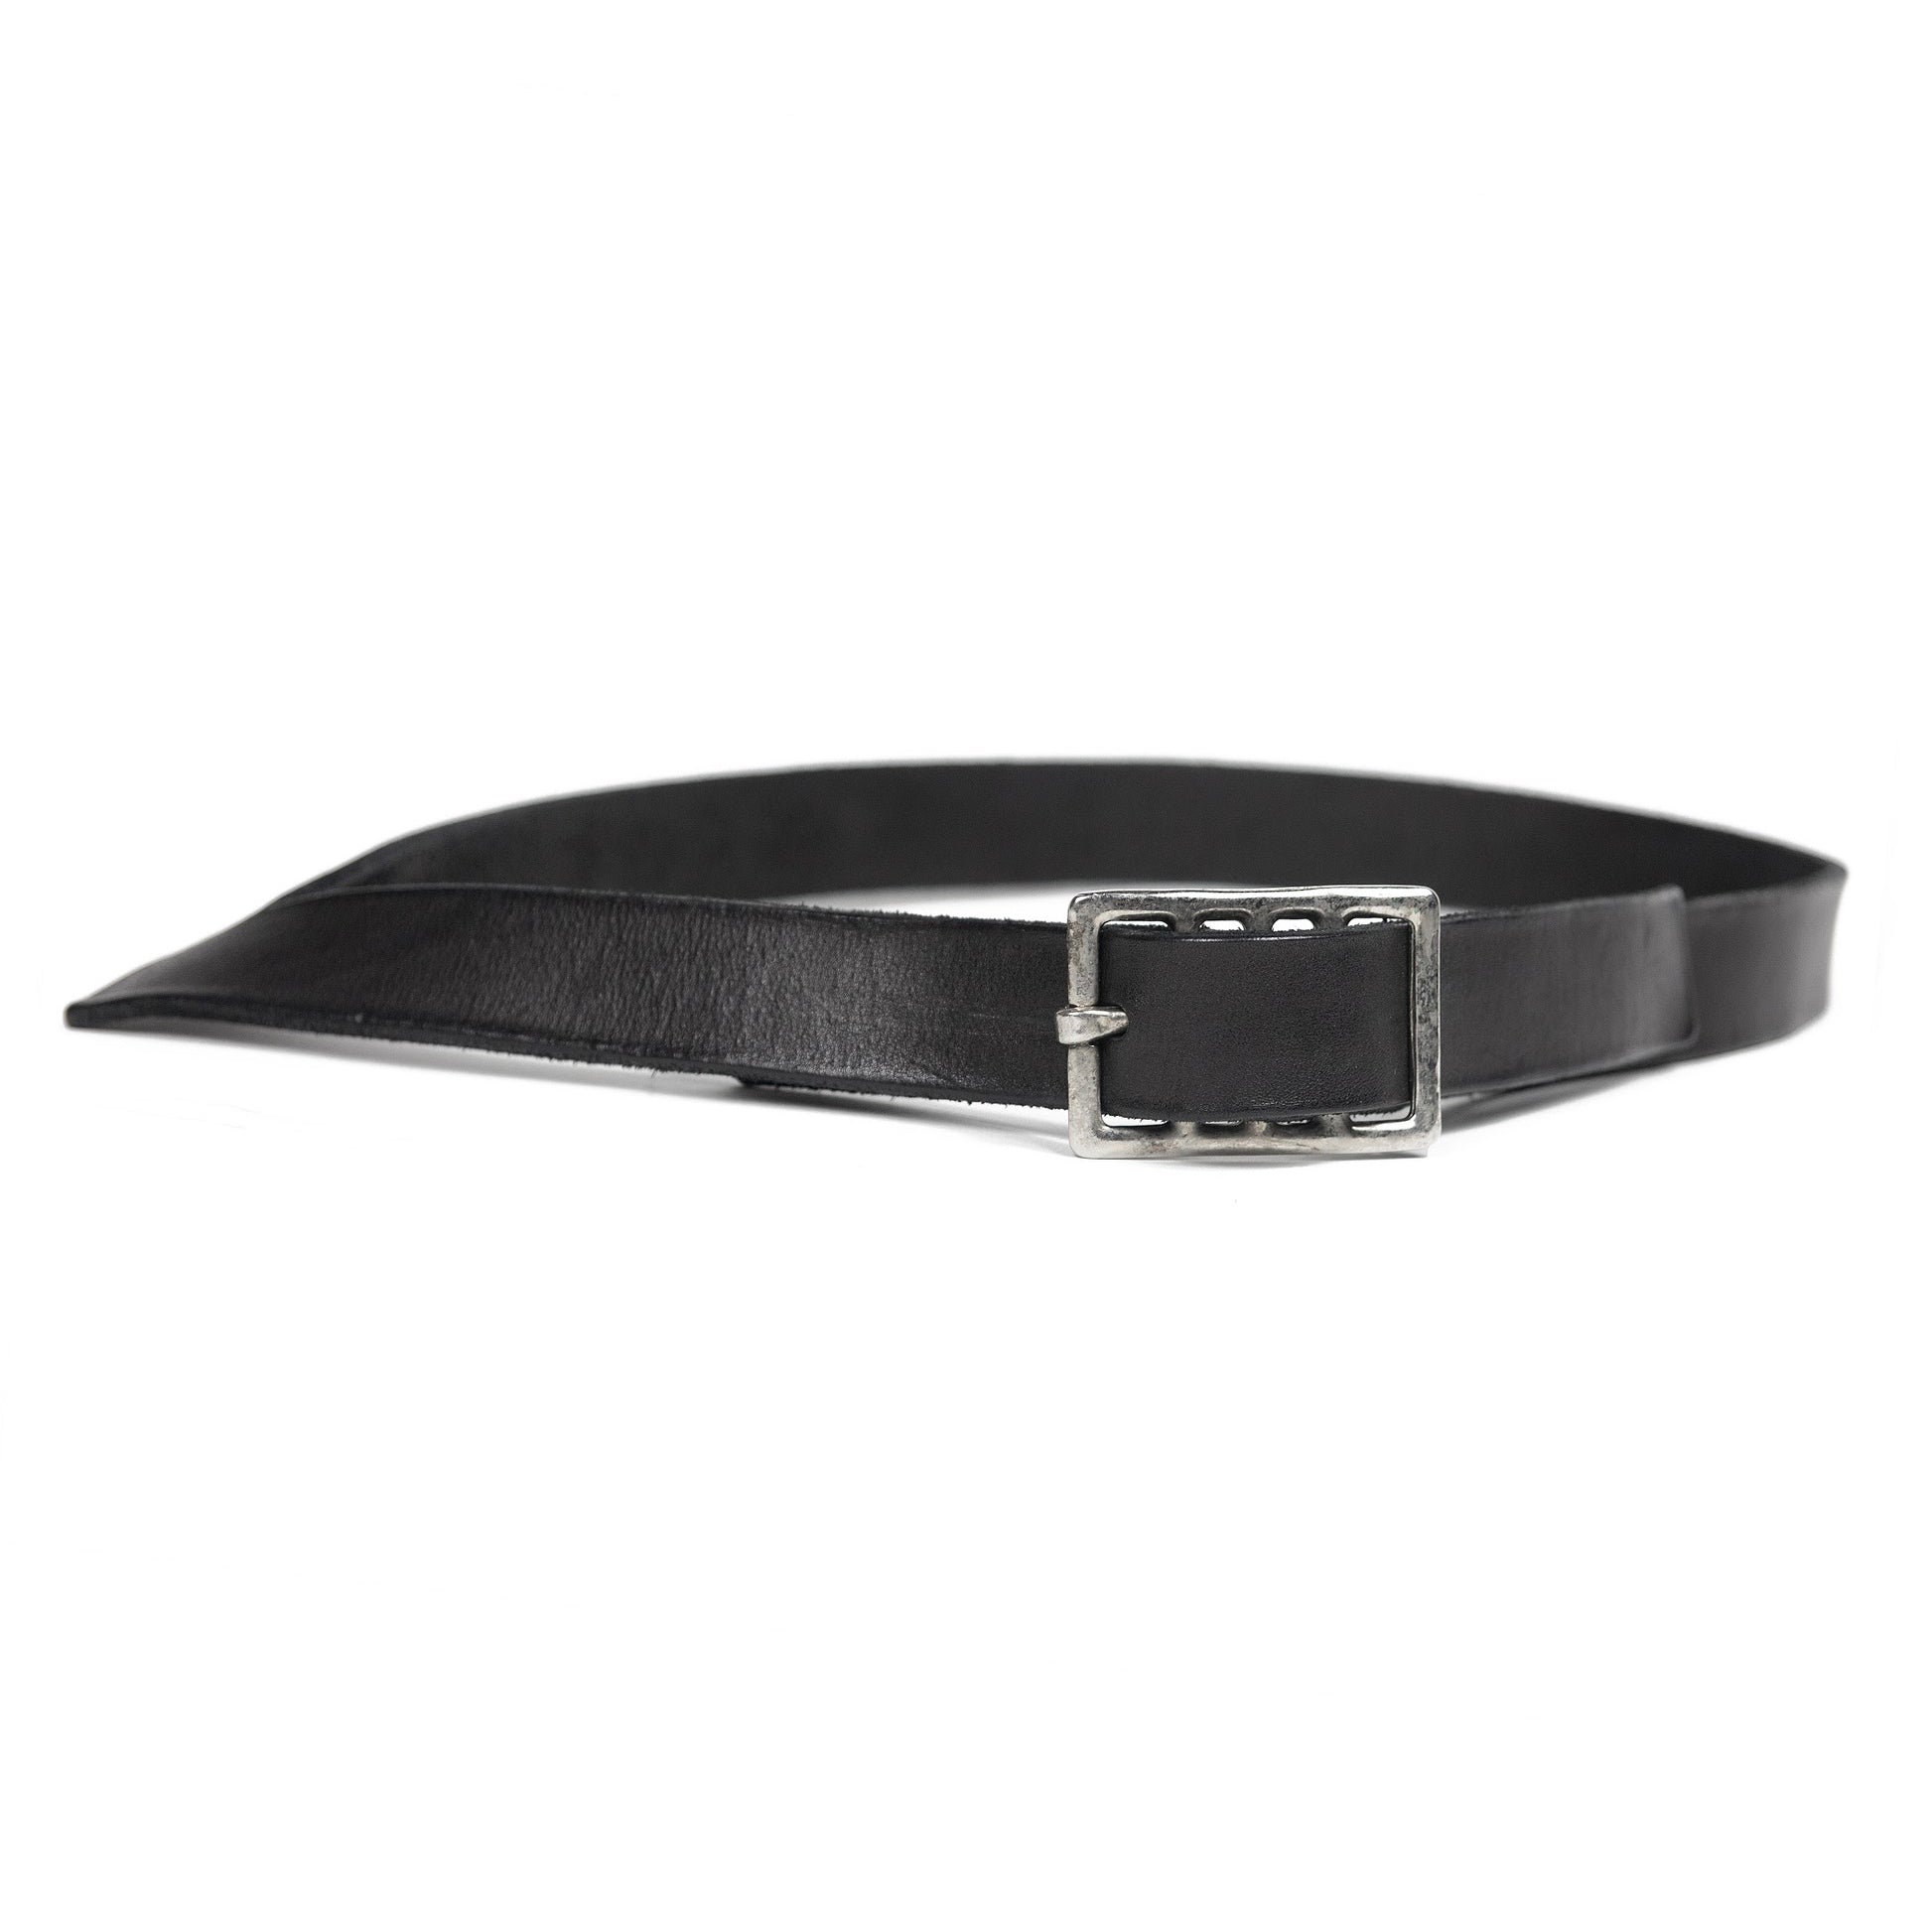 Carol Christian Poell Angled Leather Belt - SILVER LEAGUE